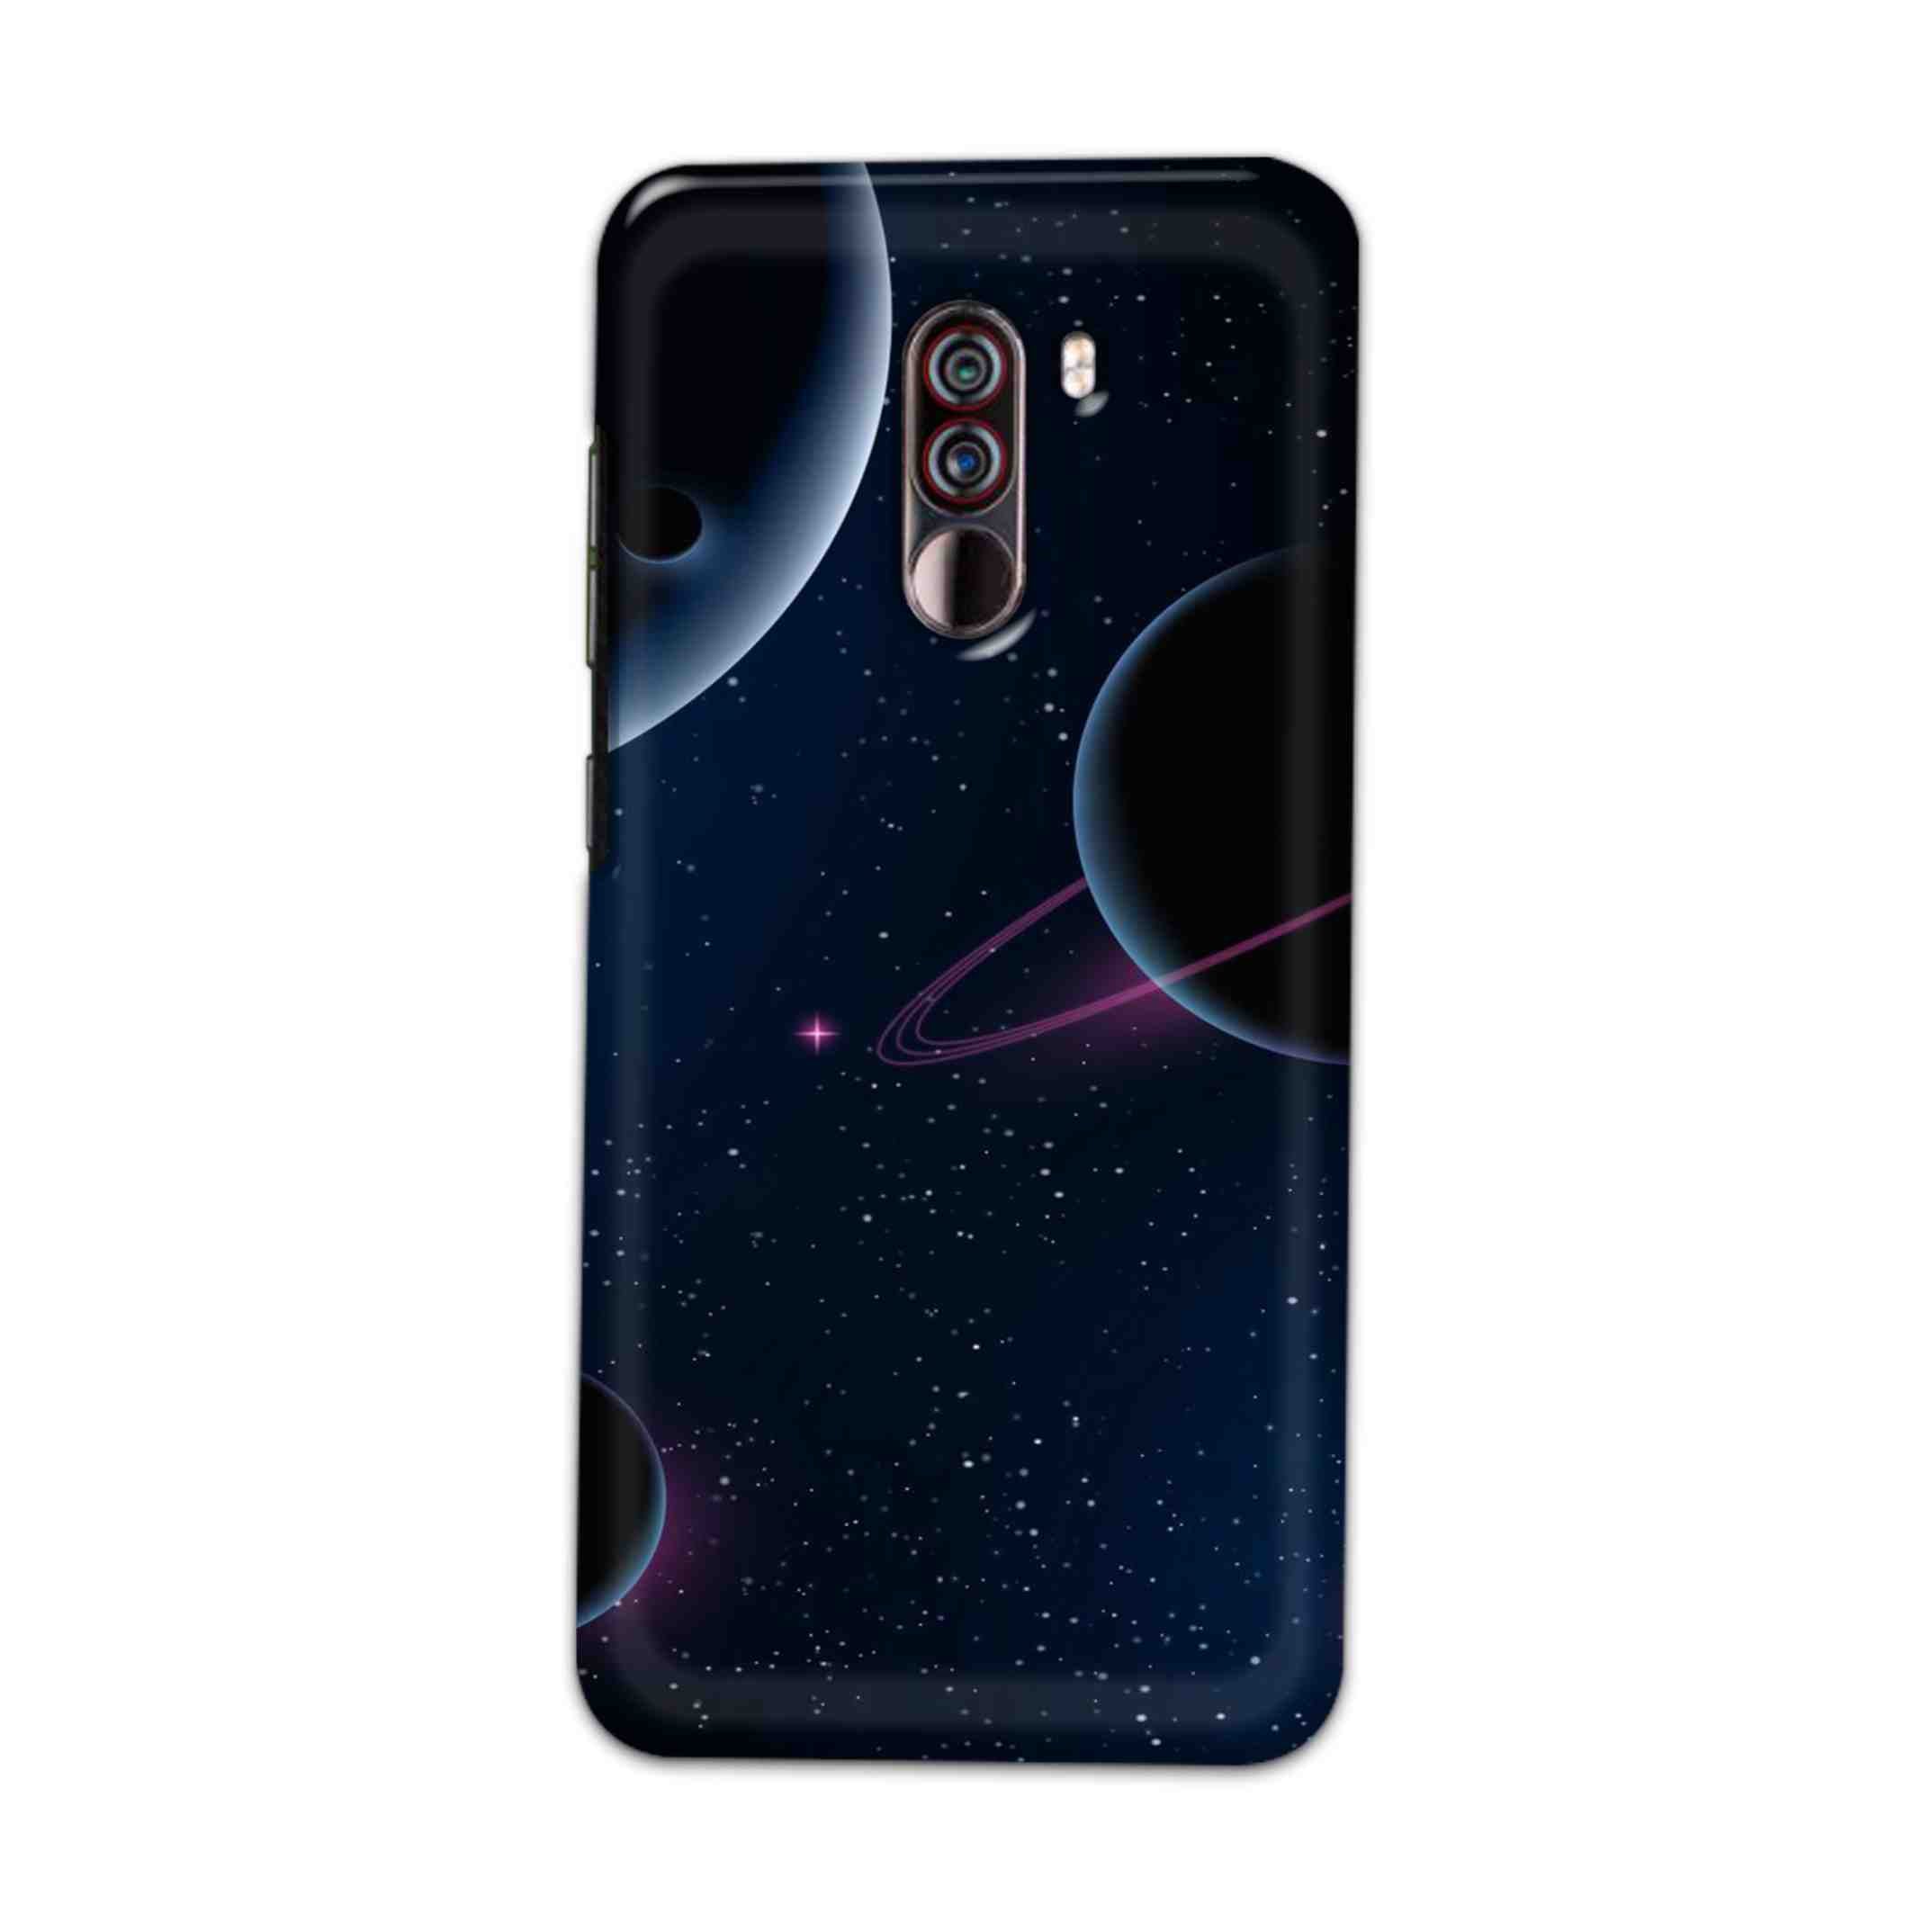 Buy Night Space Hard Back Mobile Phone Case Cover For Xiaomi Pocophone F1 Online